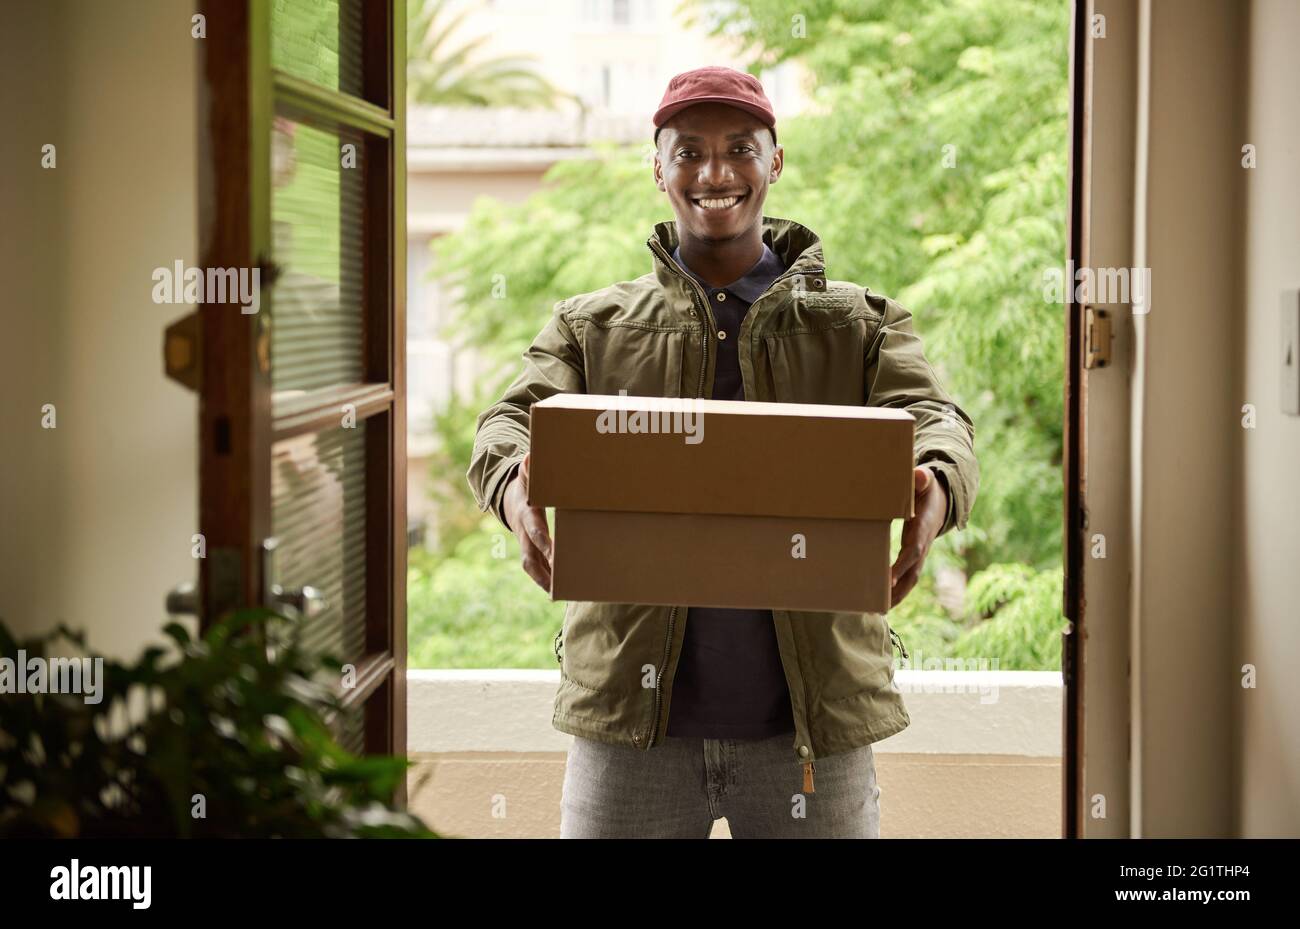 Smiling African delivery man holding packages at a front door Stock Photo